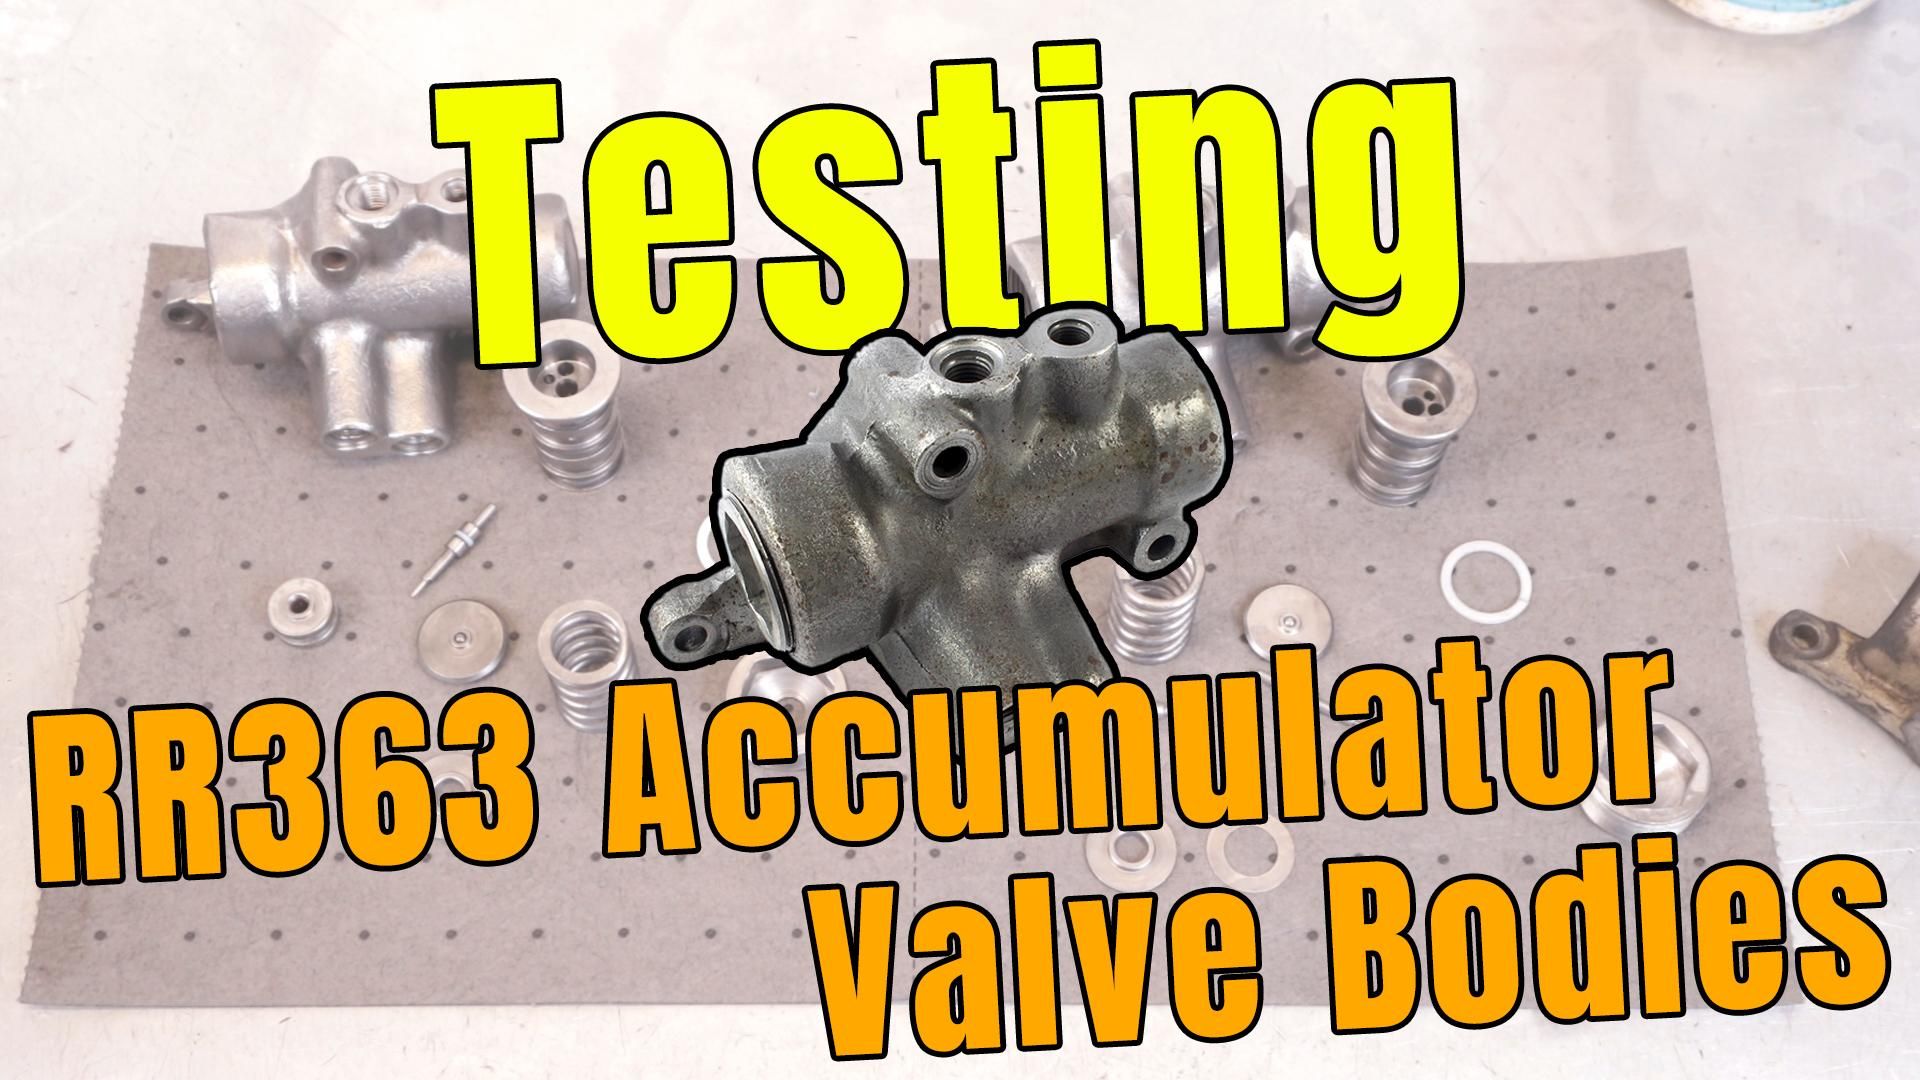 Testing Accumulator Valve Bodies: A Must-know for Rolls-Royce and Bentley Owners